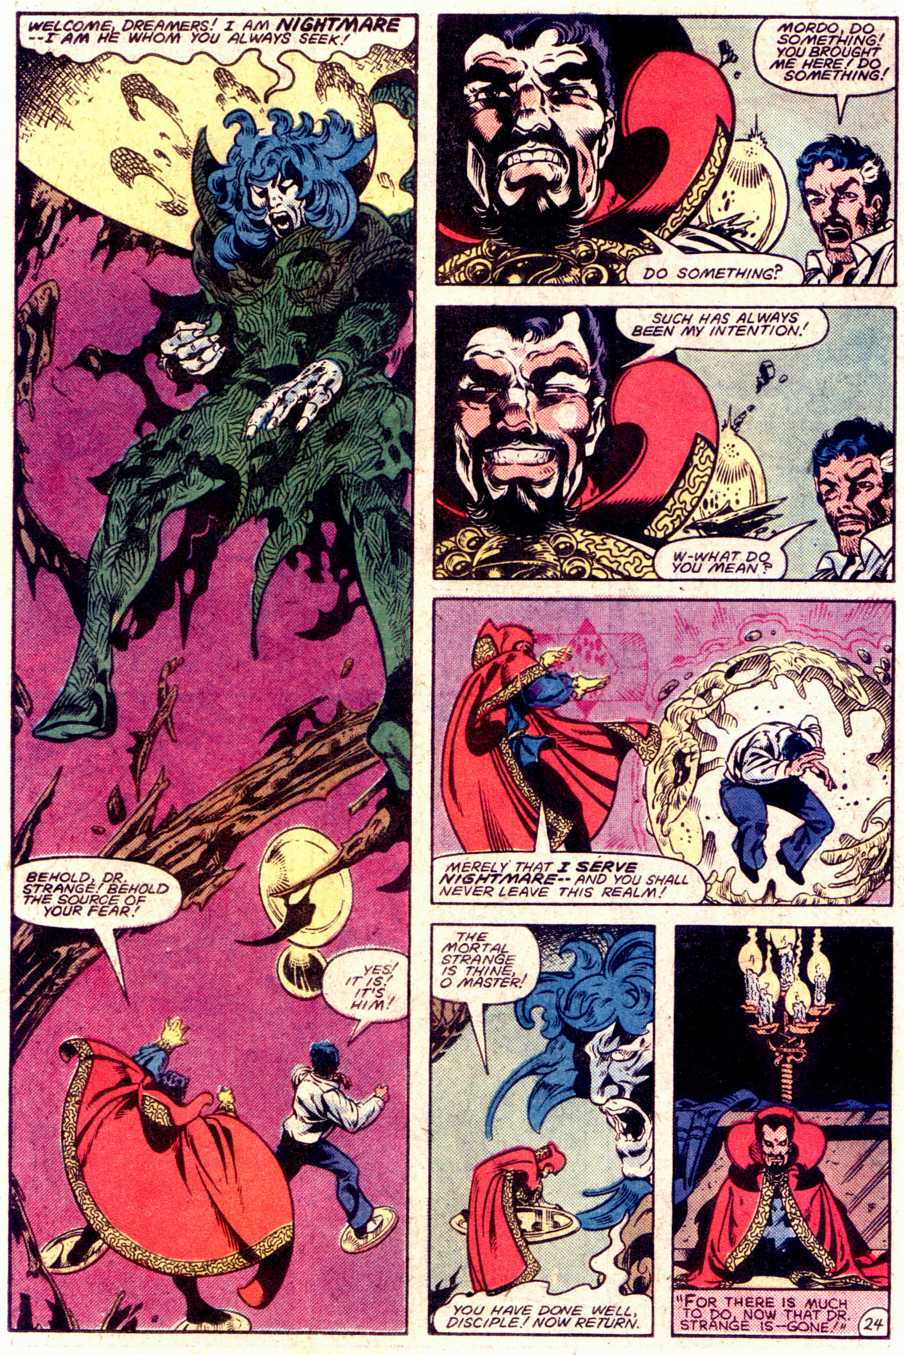 What If? (1977) issue 40 - Dr Strange had not become master of The mystic arts - Page 25